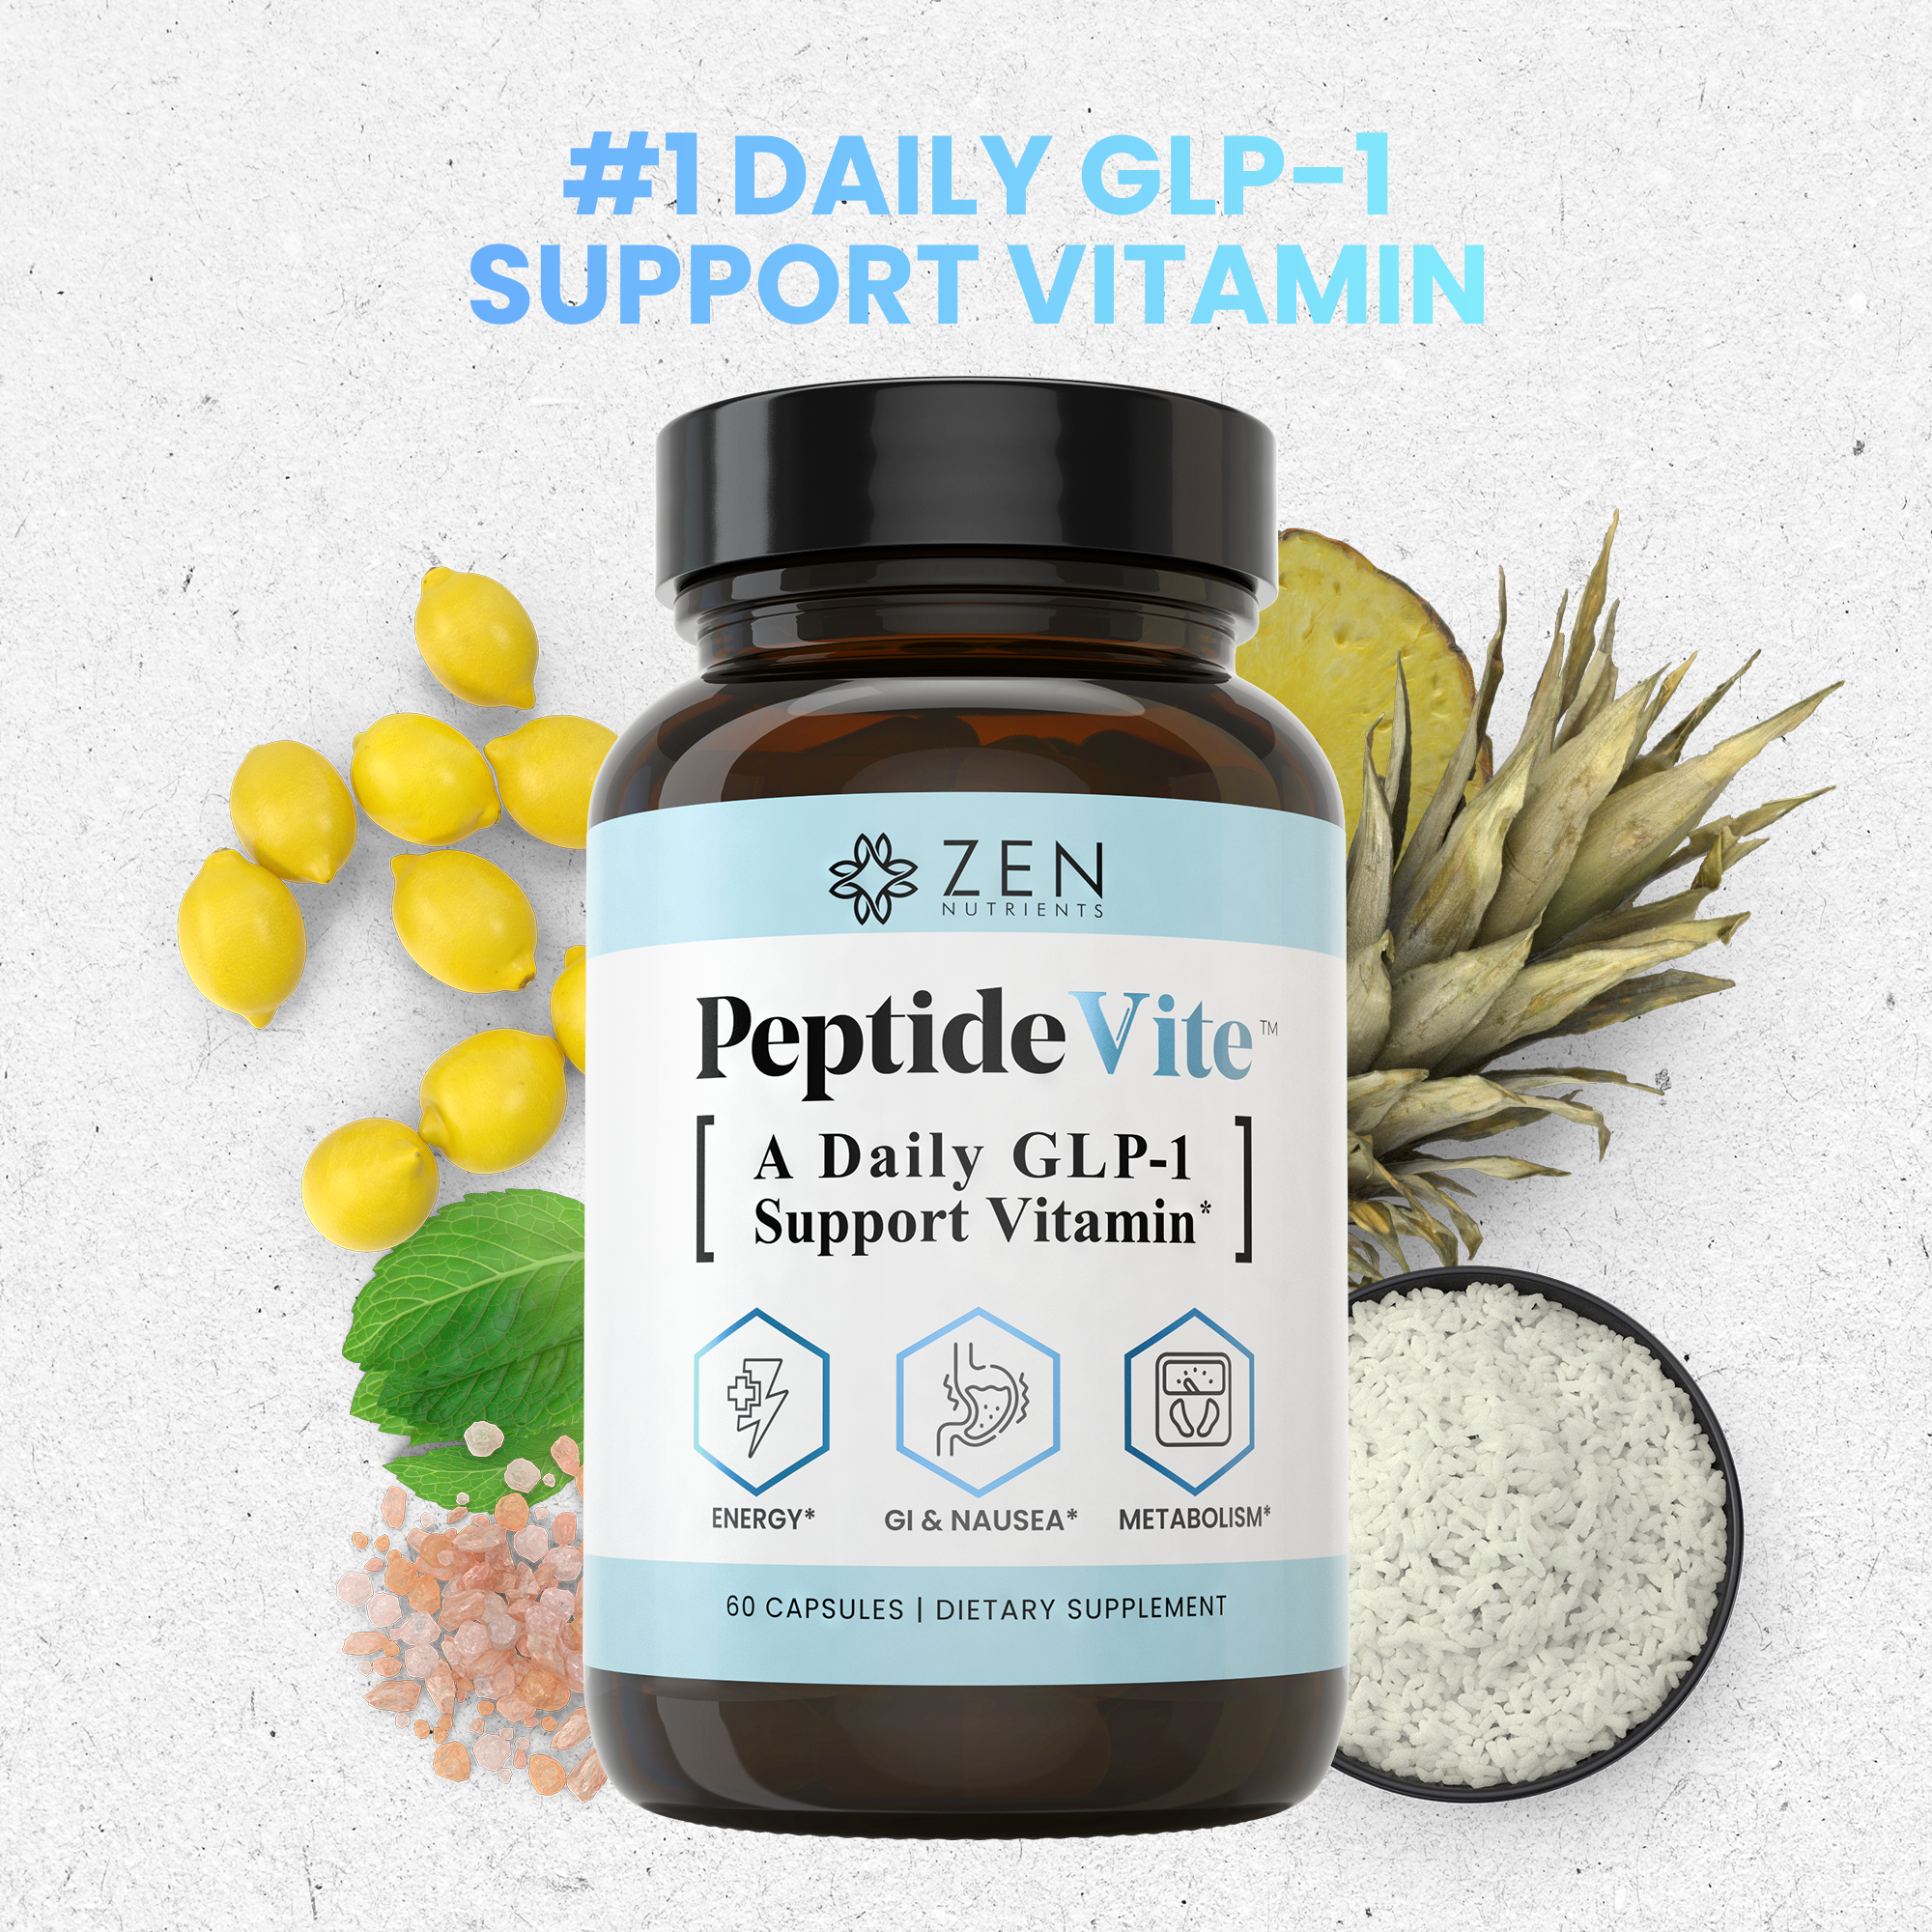 PeptideVite™ #1 Daily GLP-1 Support Vitamin for Nausea, Fatigue & Metabolic Support